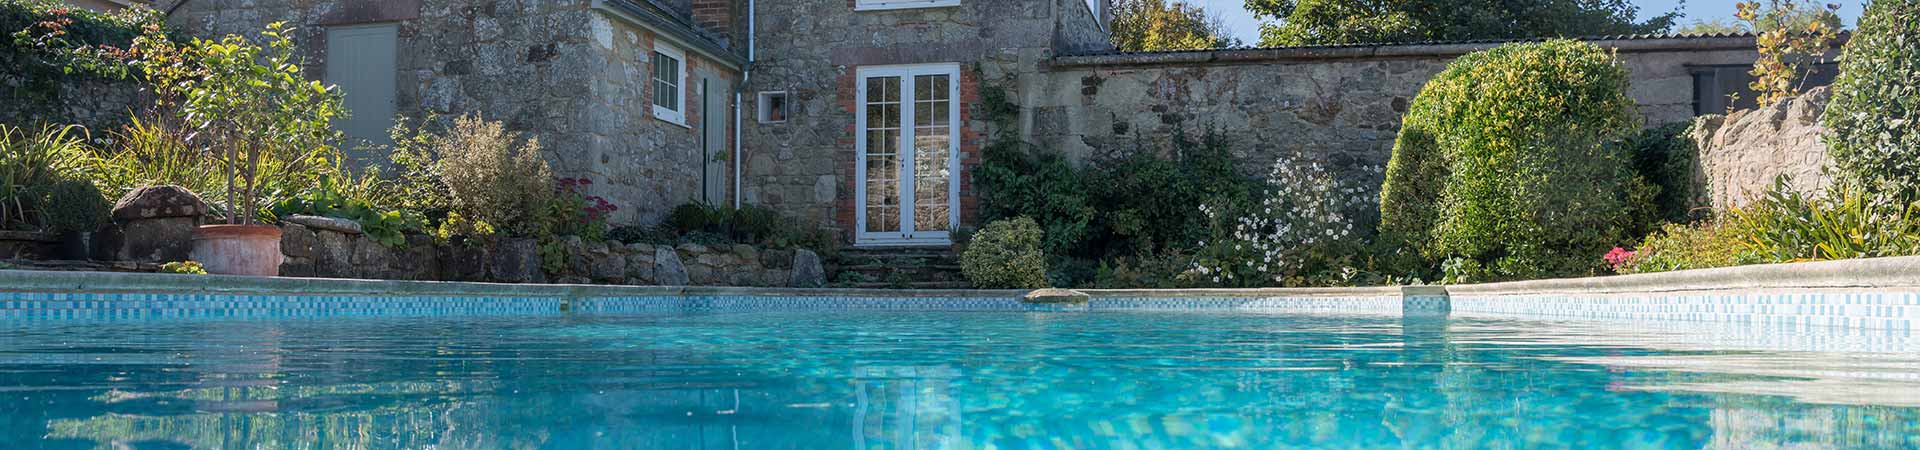 Summer Holiday Cottages in The Cotswolds